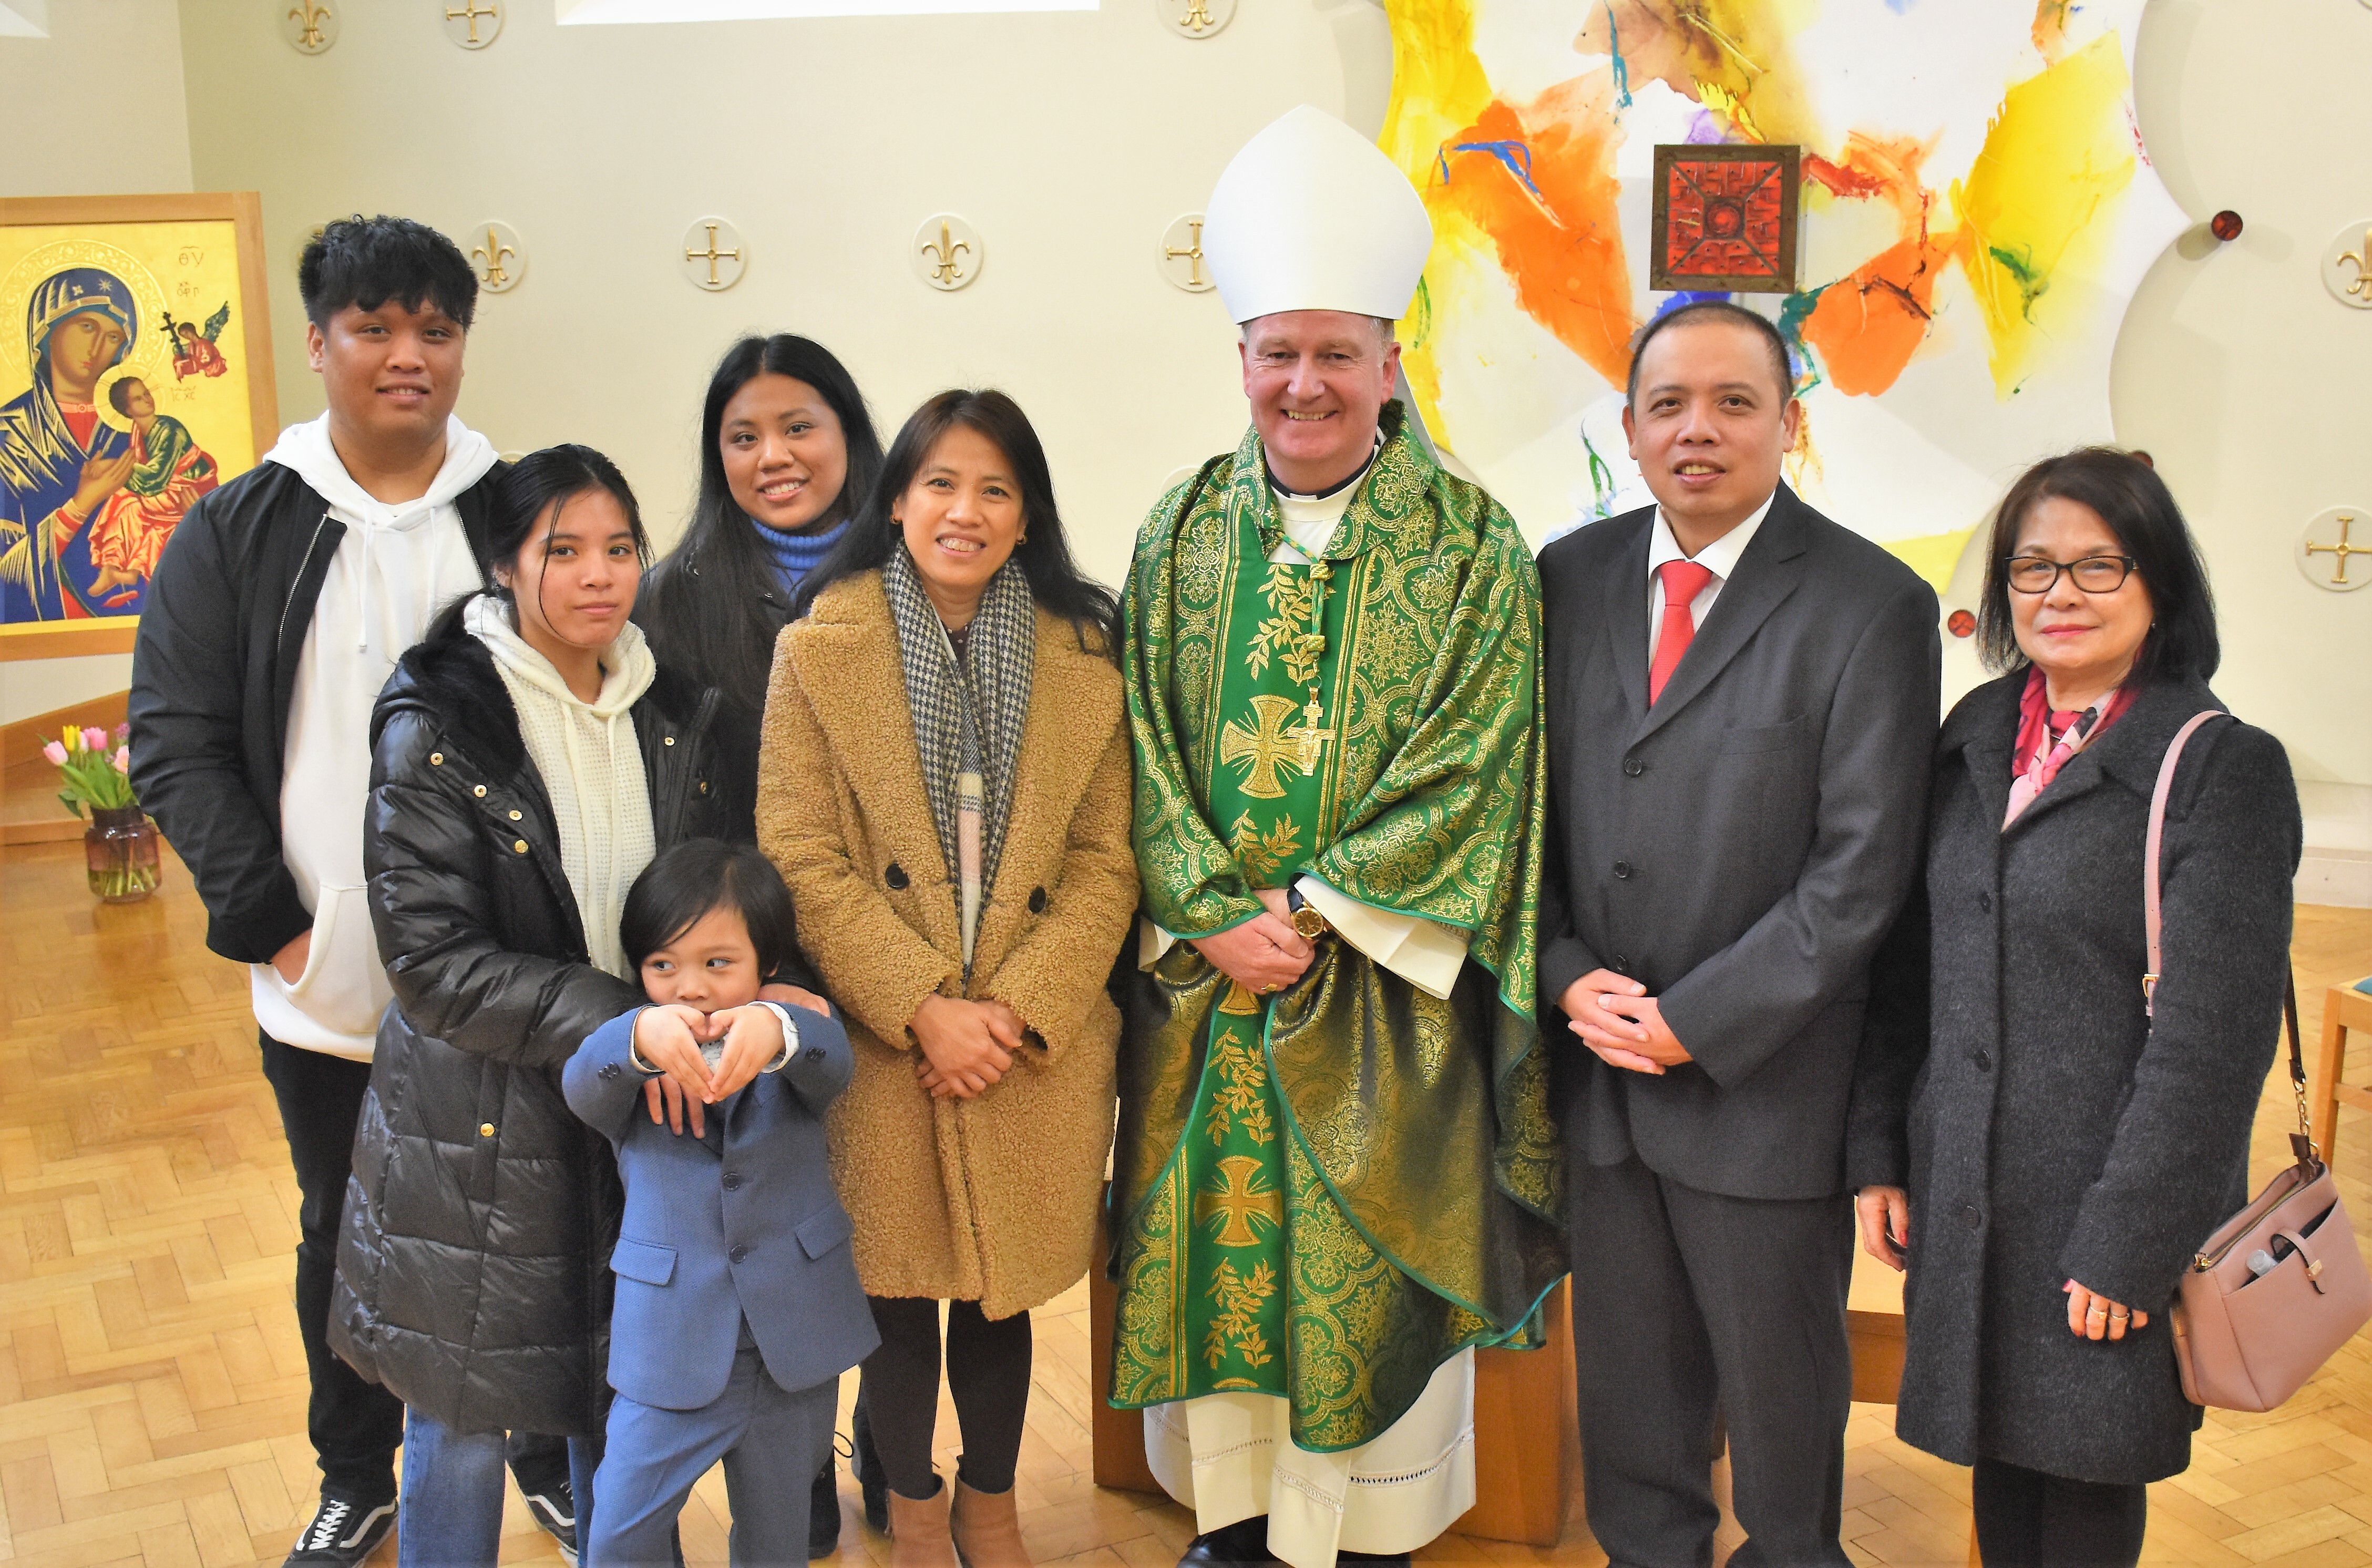 230129-Bishop-Dempsey-with-Norvil-Caguioa-R-and-his-wife-Antoinette-L-together-with-members-of-their-family-after-Norvil-received-the-Ministry-of-Acolyte.jpg#asset:11433